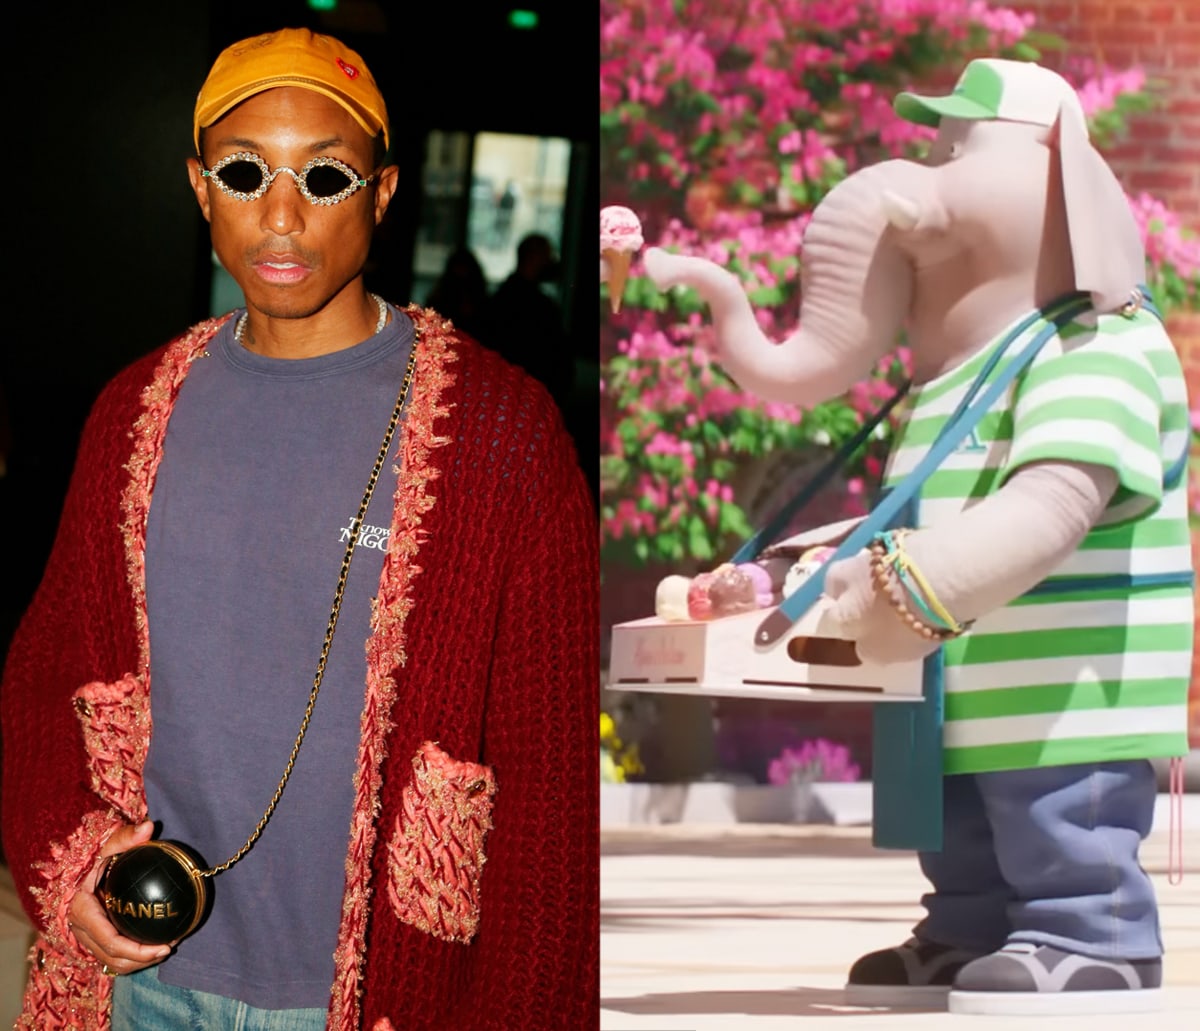 Record producer, rapper, and fashion designer Pharrell Williams is elephant Alfonso who's selling ice cream in Redshore City